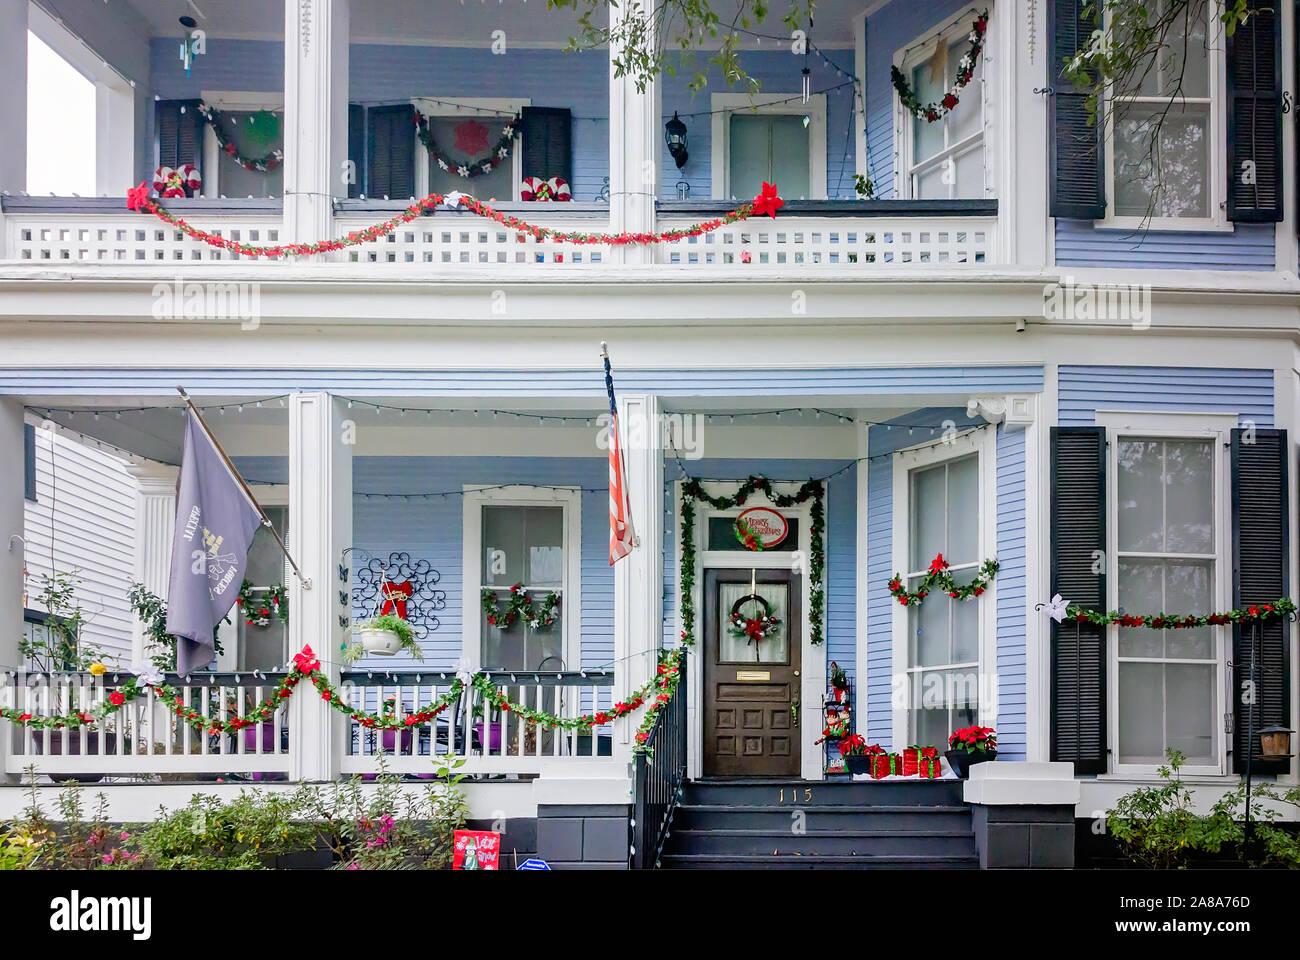 A historic home is decorated for Christmas, Dec. 18, 2017, in the Church Street Historic District in Mobile, Alabama. Stock Photo